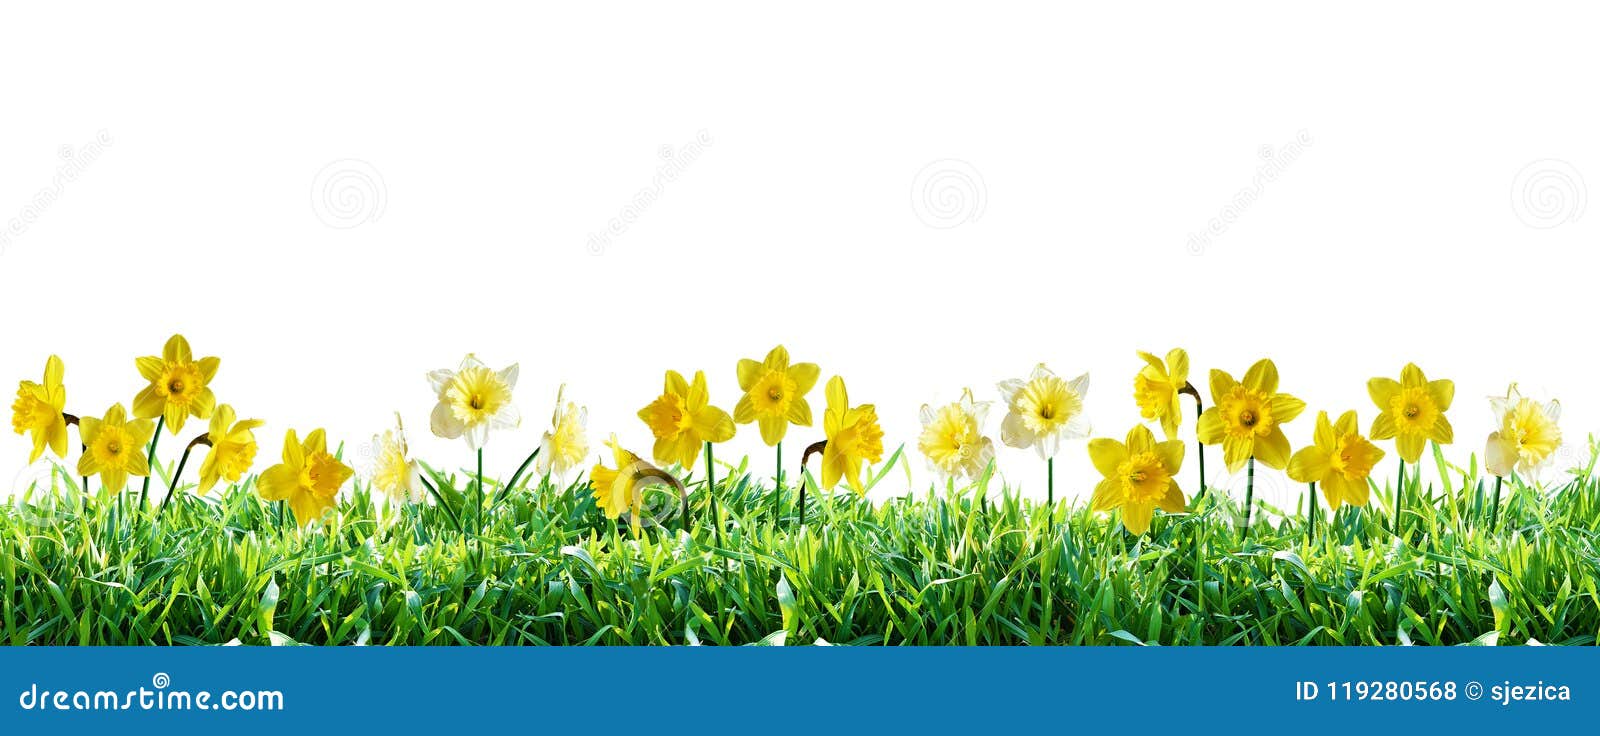 narcissus in green grass. spring border.